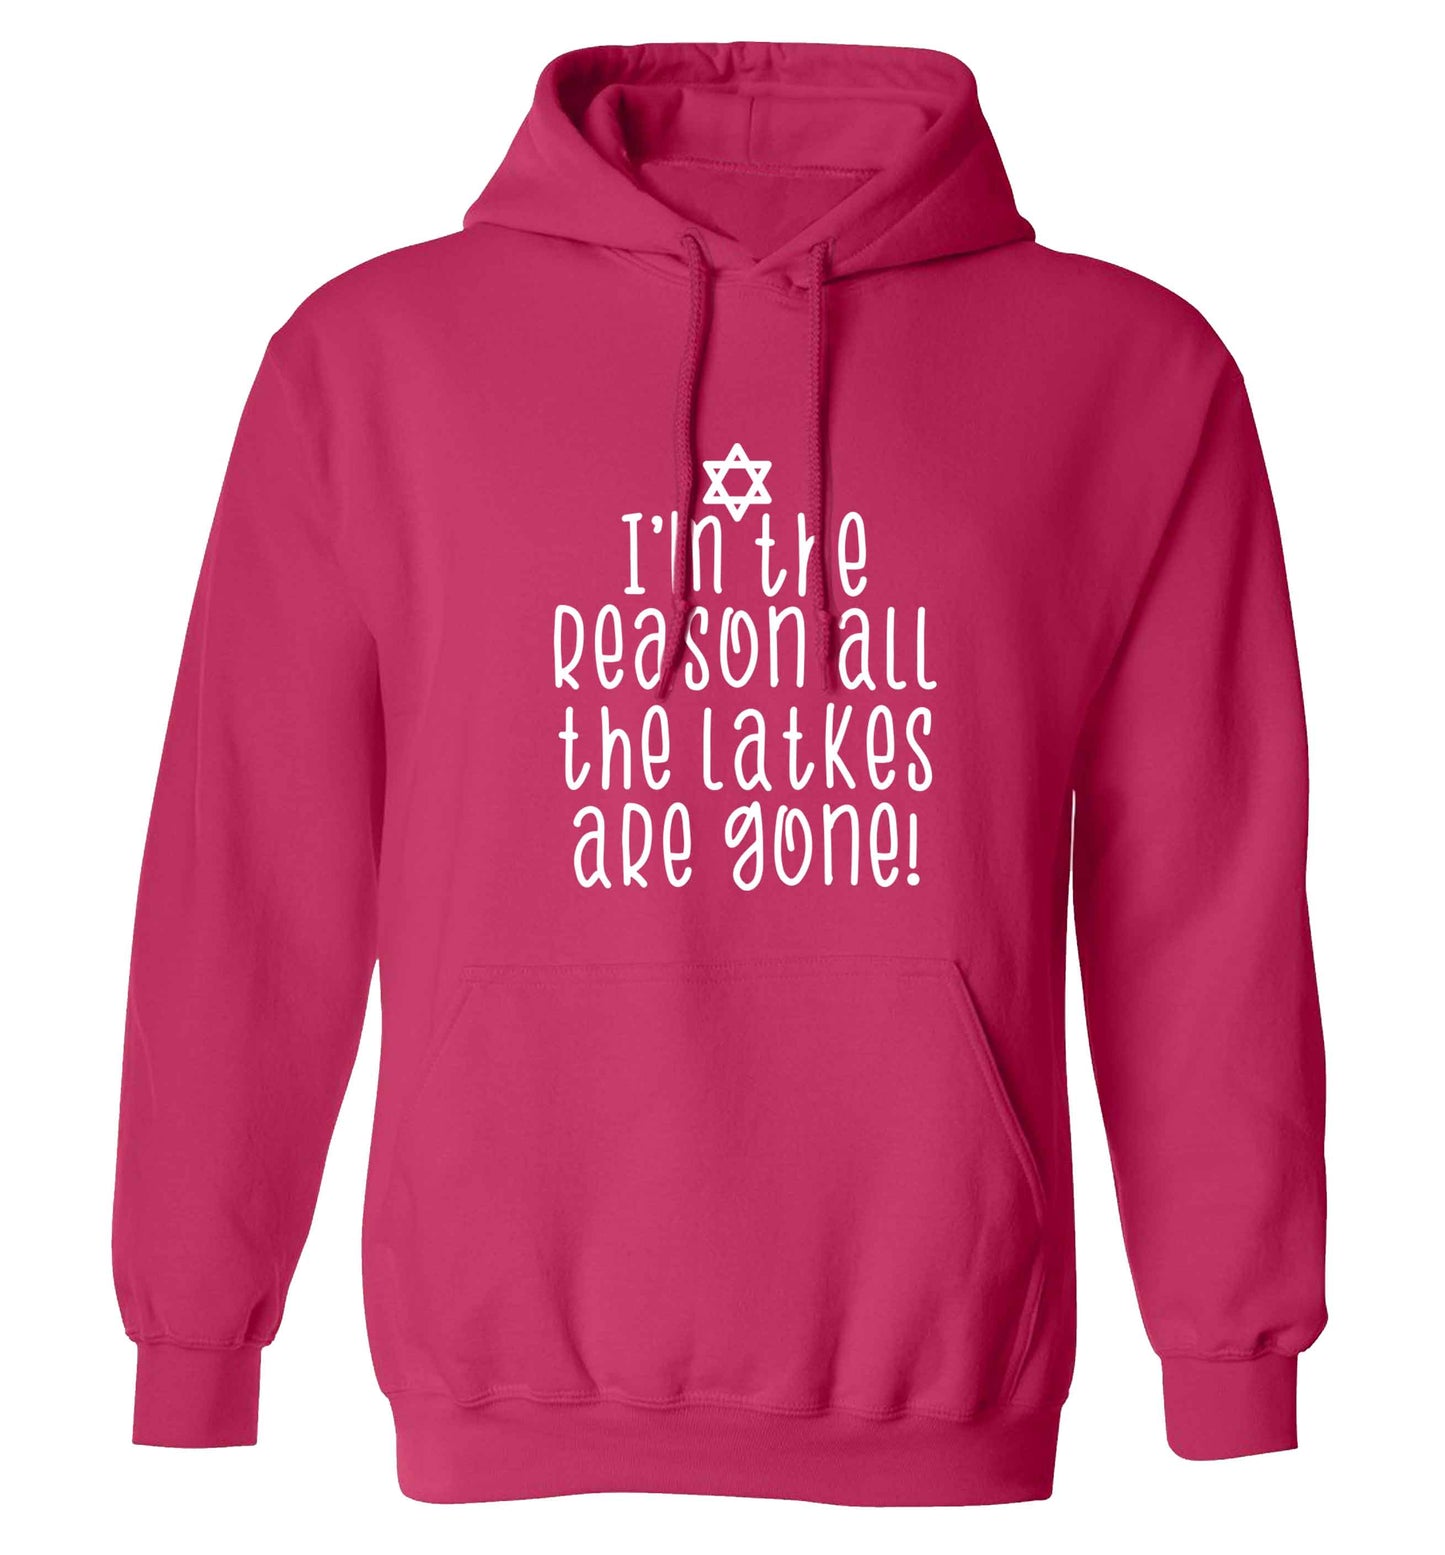 I'm the reason all the latkes are gone adults unisex pink hoodie 2XL